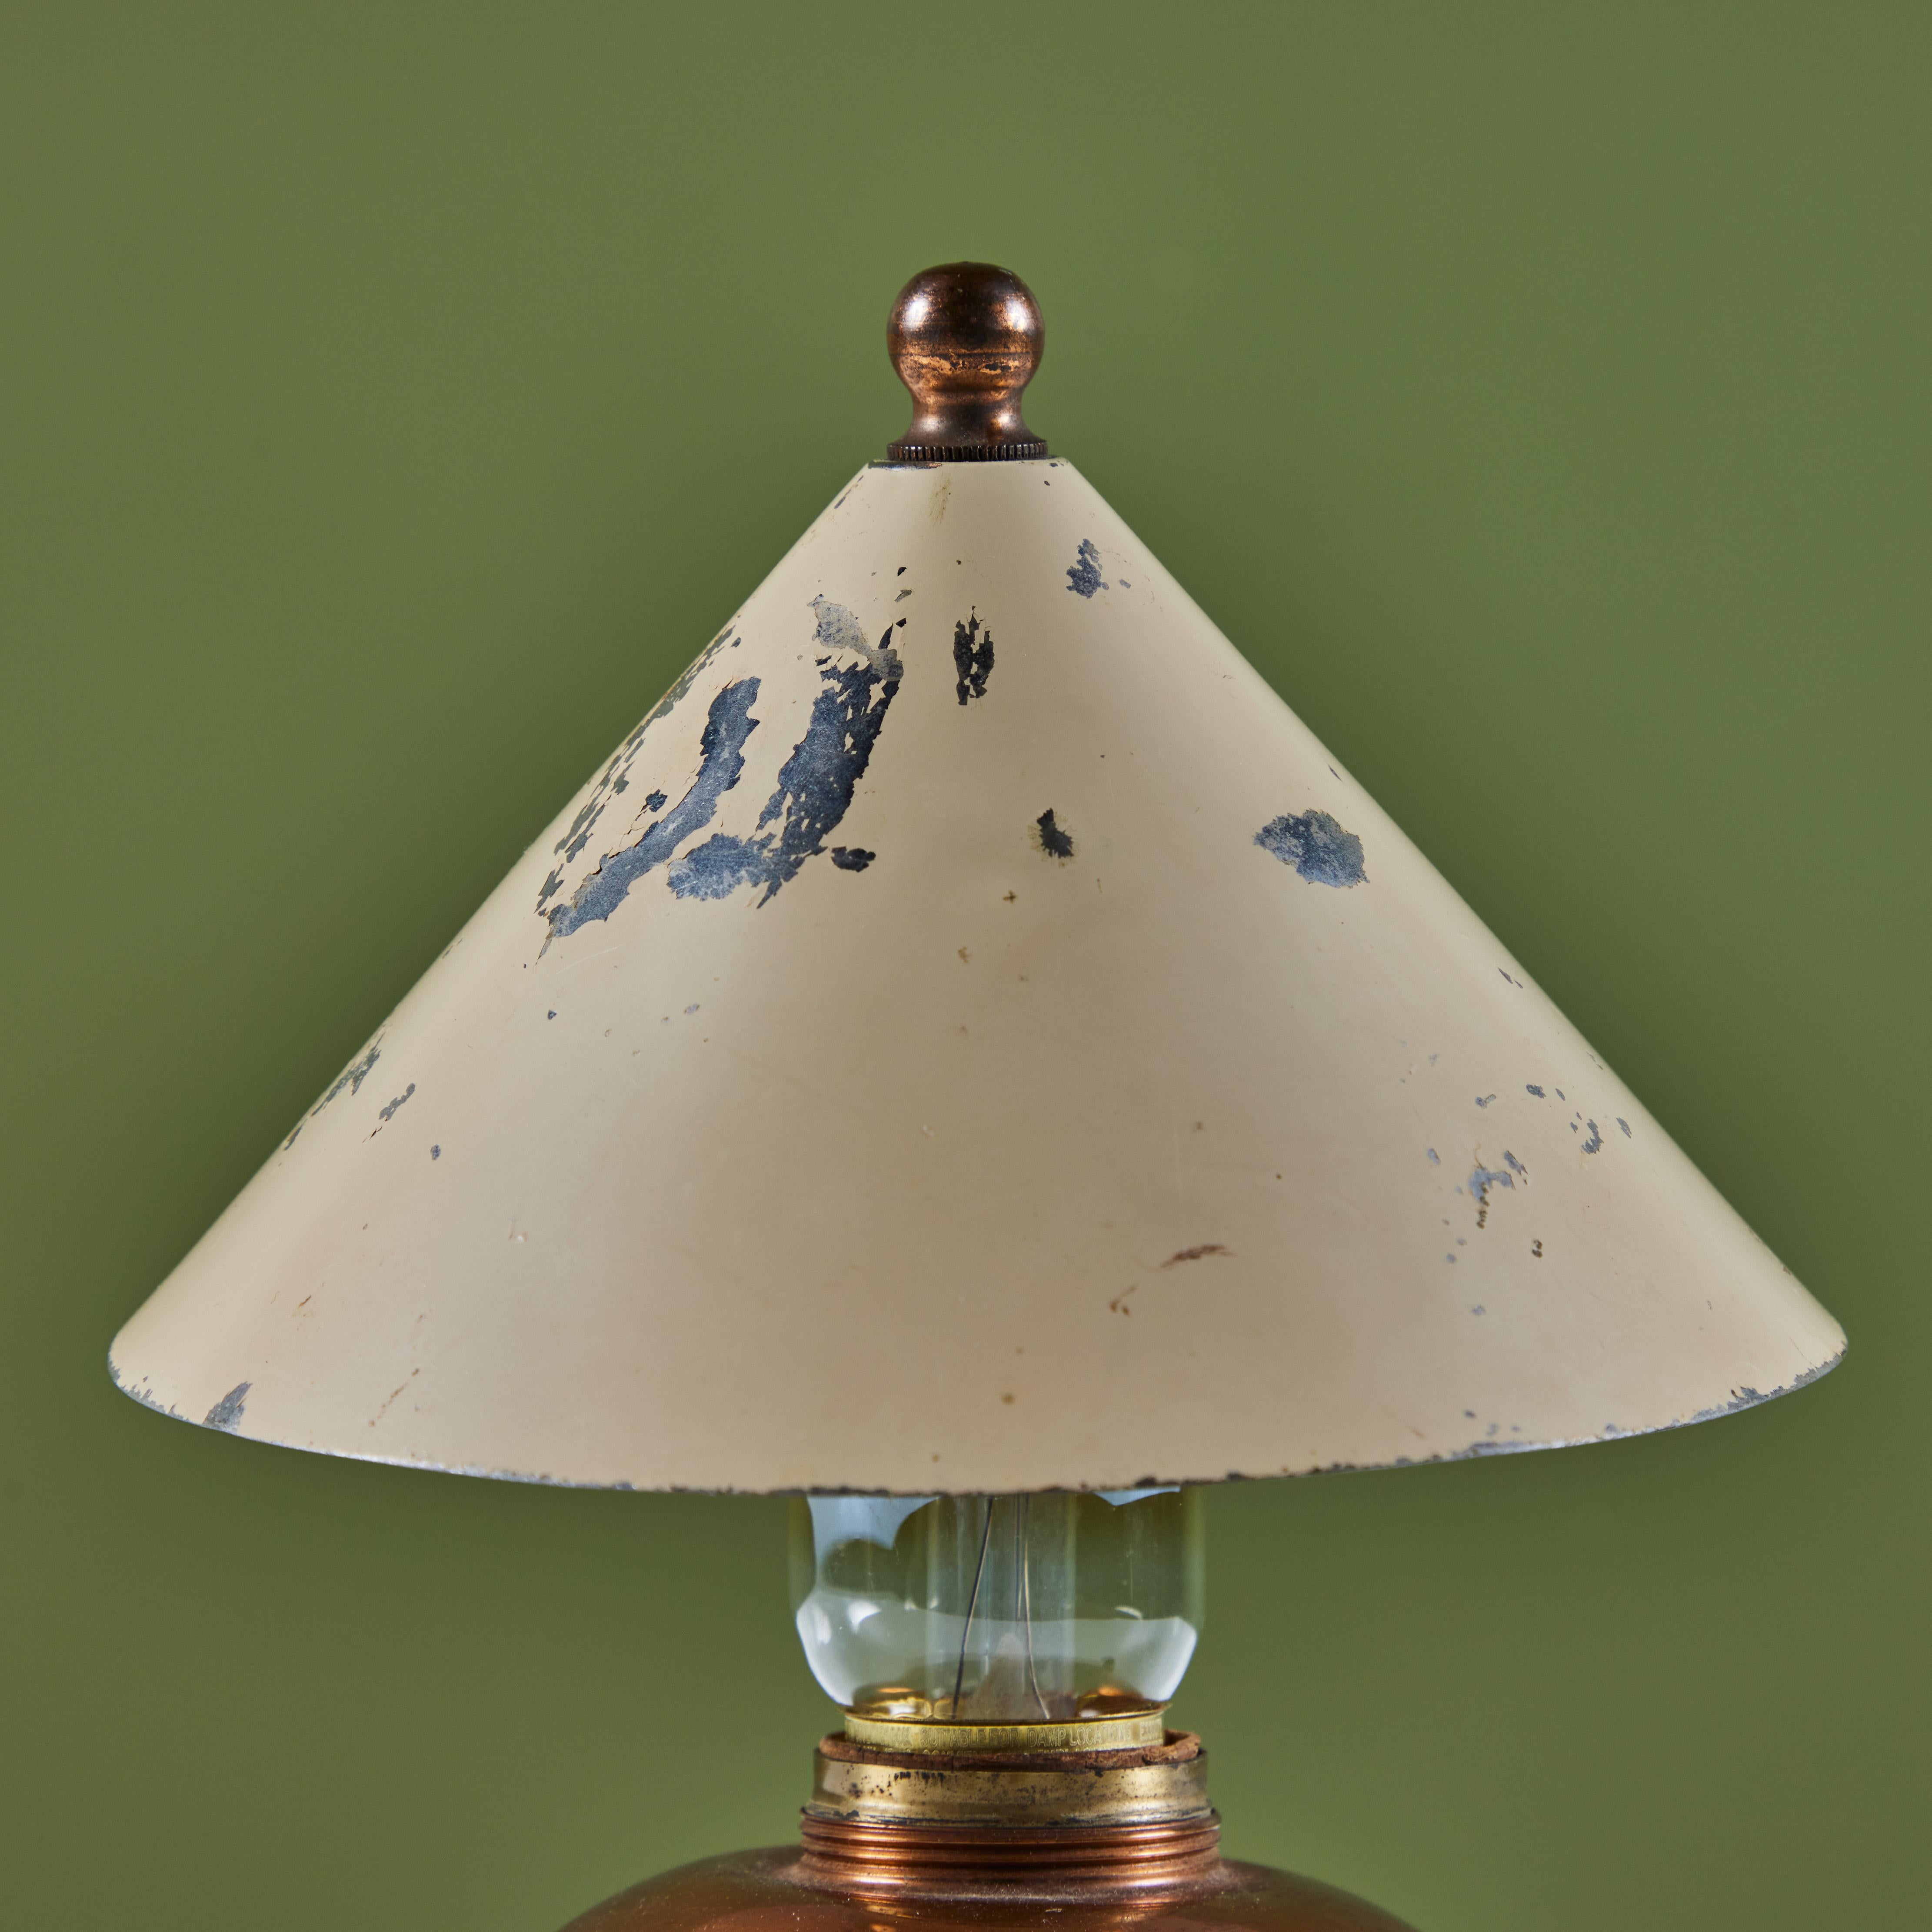 Copper and Enamel Shade Glow Lamp by Ruth Gerth for Chase 1